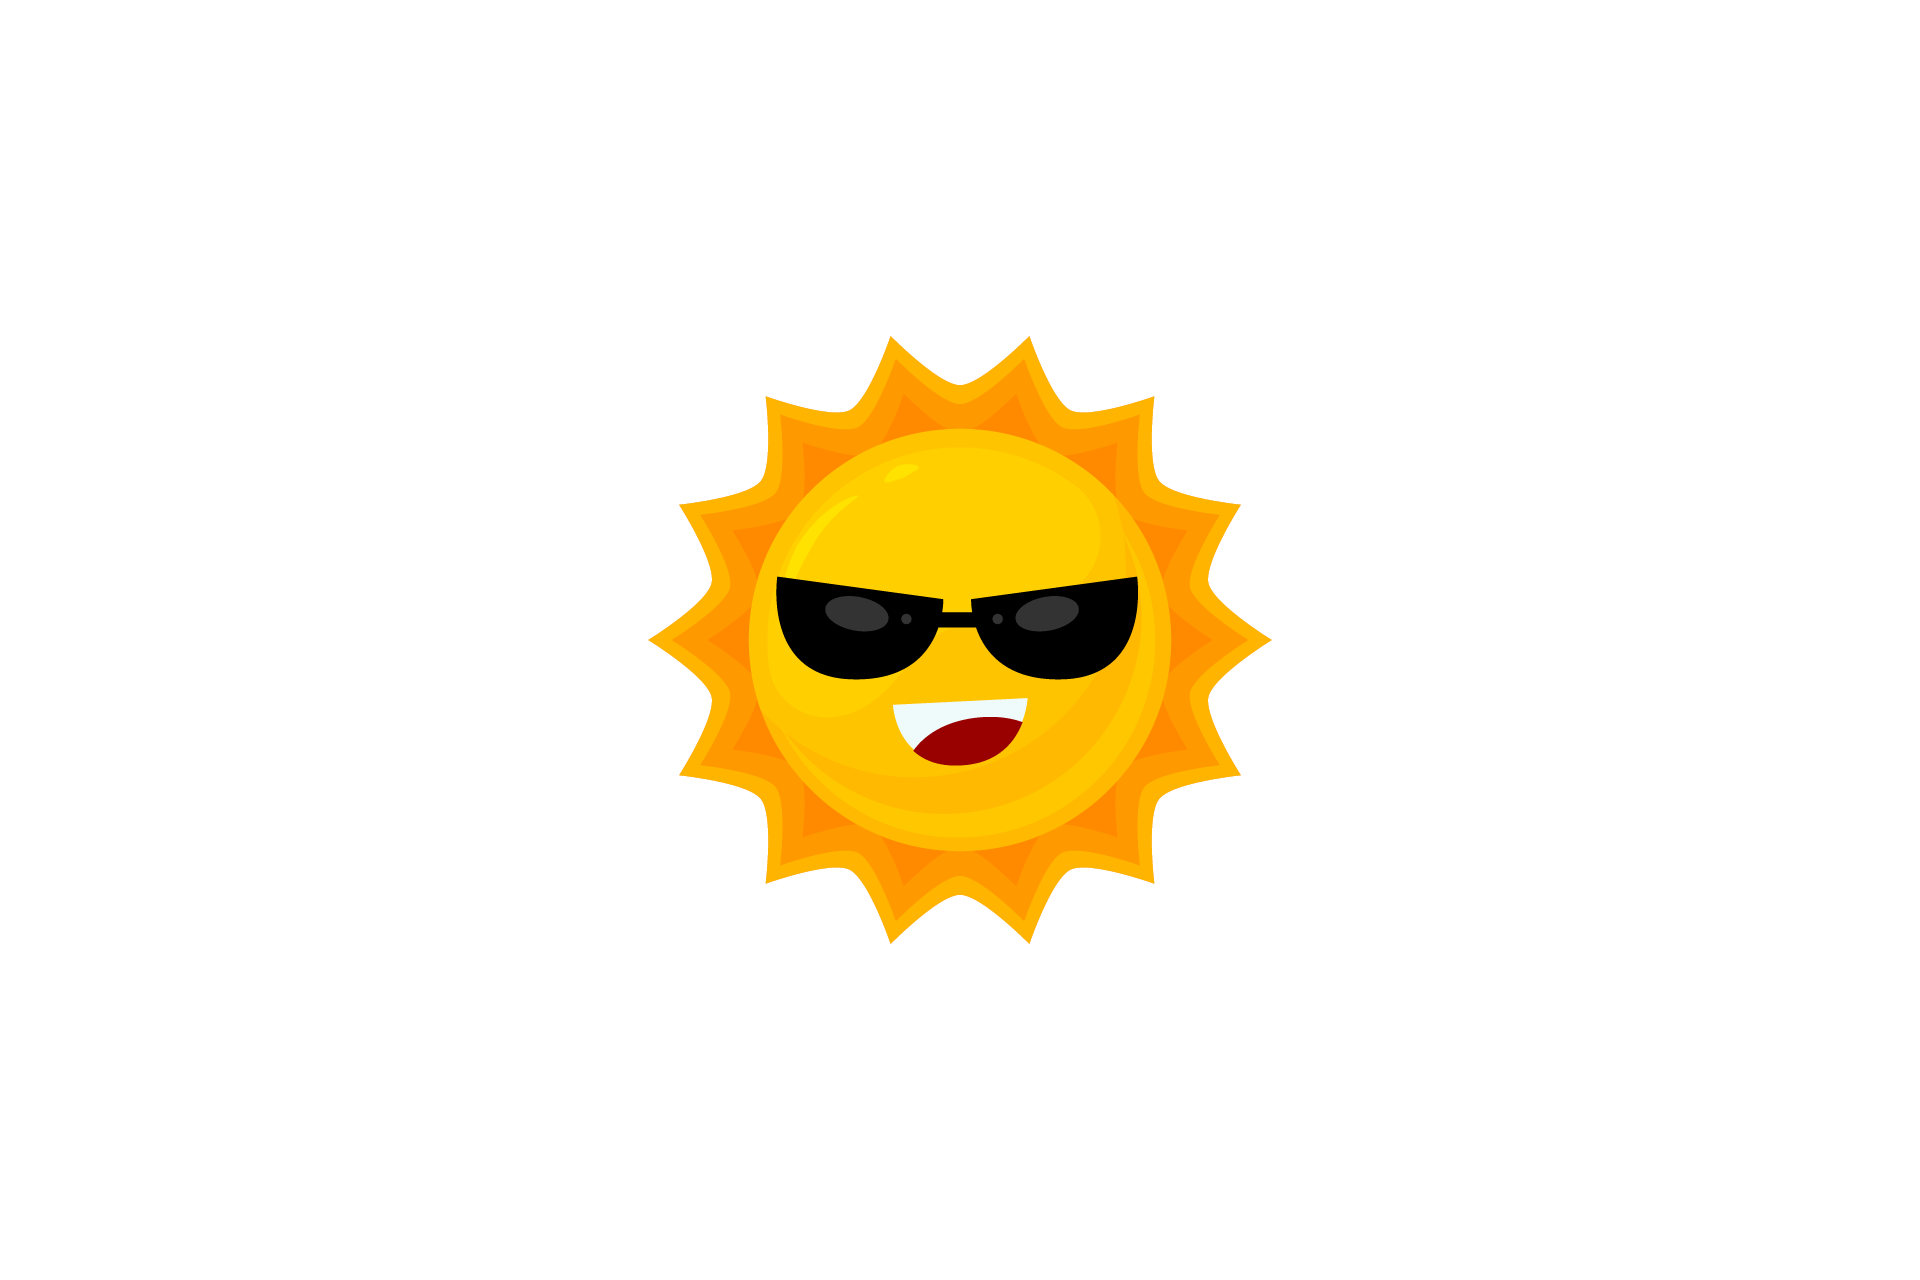 Cool Summer Sun Illustration Graphic by daisy things · Creative